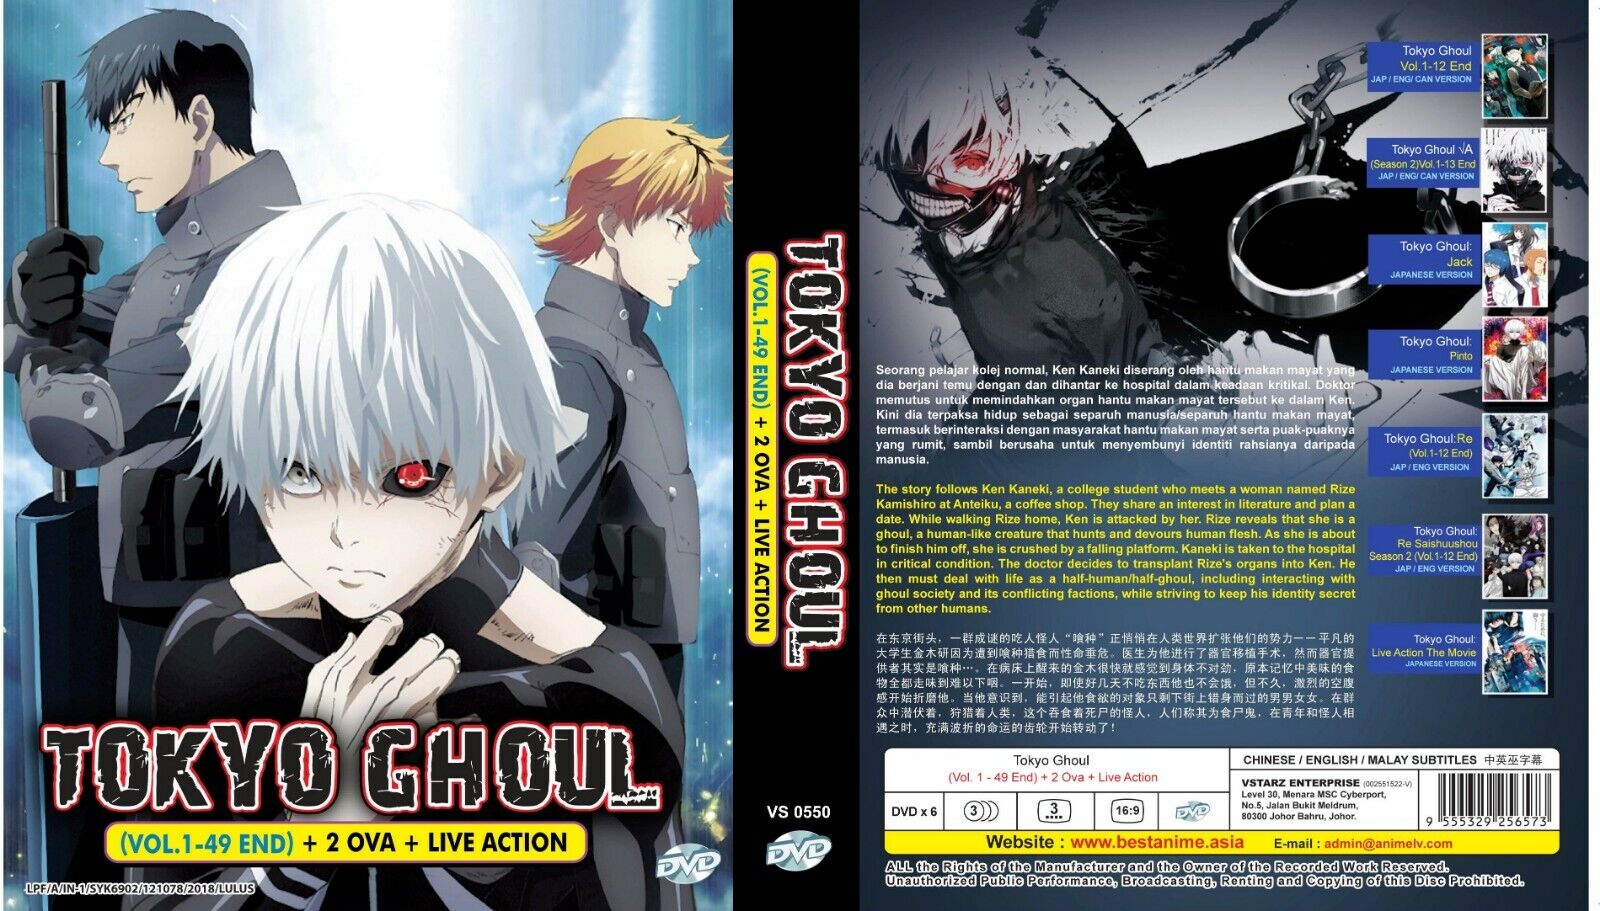 cristine javier recommends Tokyo Ghoul Season 1 Dub